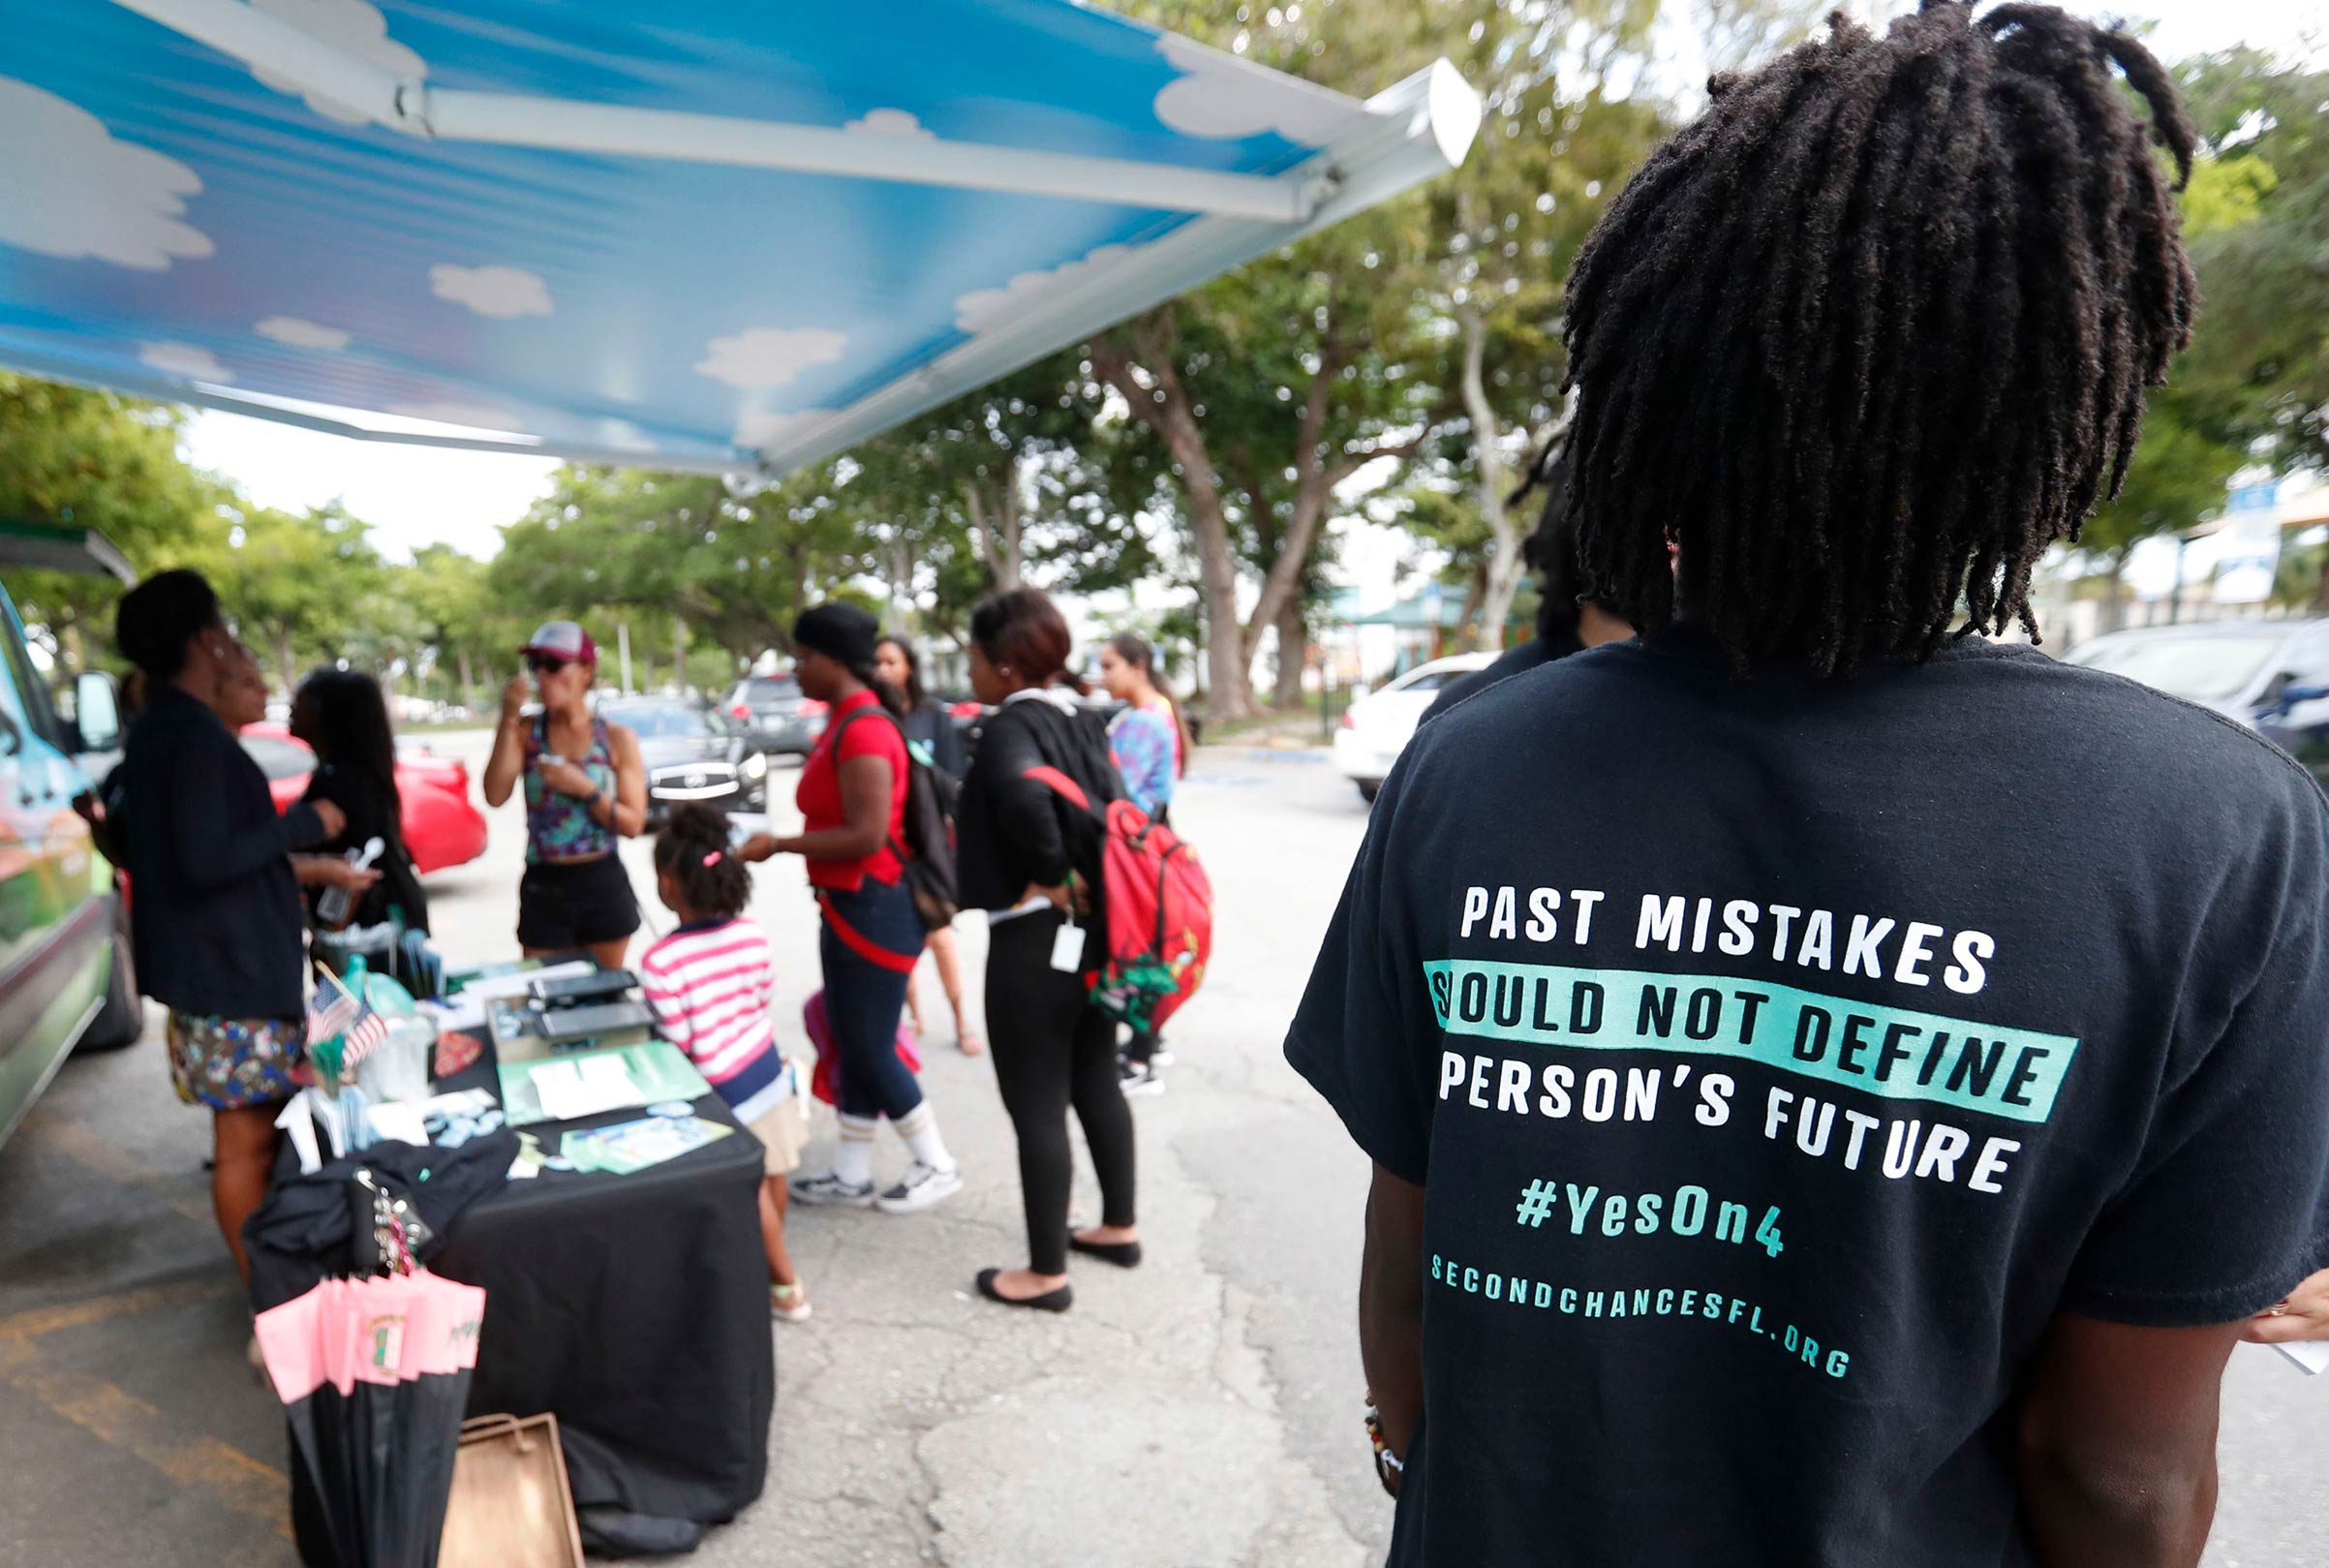 People gather around the Ben &amp; Jerry's "Yes on 4" truck as they learn about Amendment 4 and eat free ice cream at Charles Hadley Park in Miami on Oct. 22, 2018. (Wilfredo Lee—AP/Shutterstock)